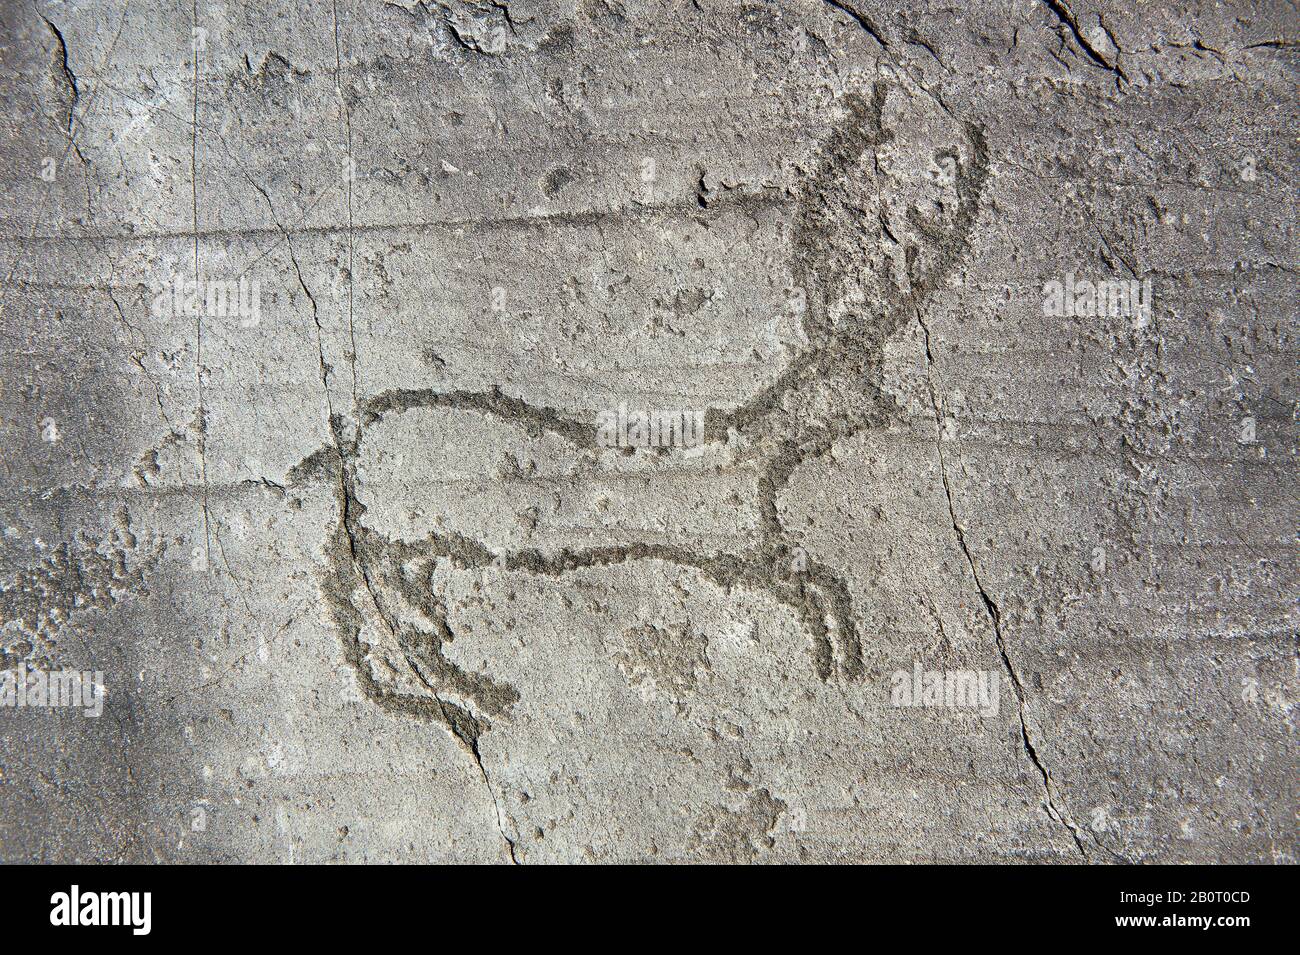 Petroglyph, rock carving, of a deer. Carved by the ancient Camunni people in the iron age between 1000-1200 BC. Rock no 24, Foppi di Nadro, Riserva Na Stock Photo